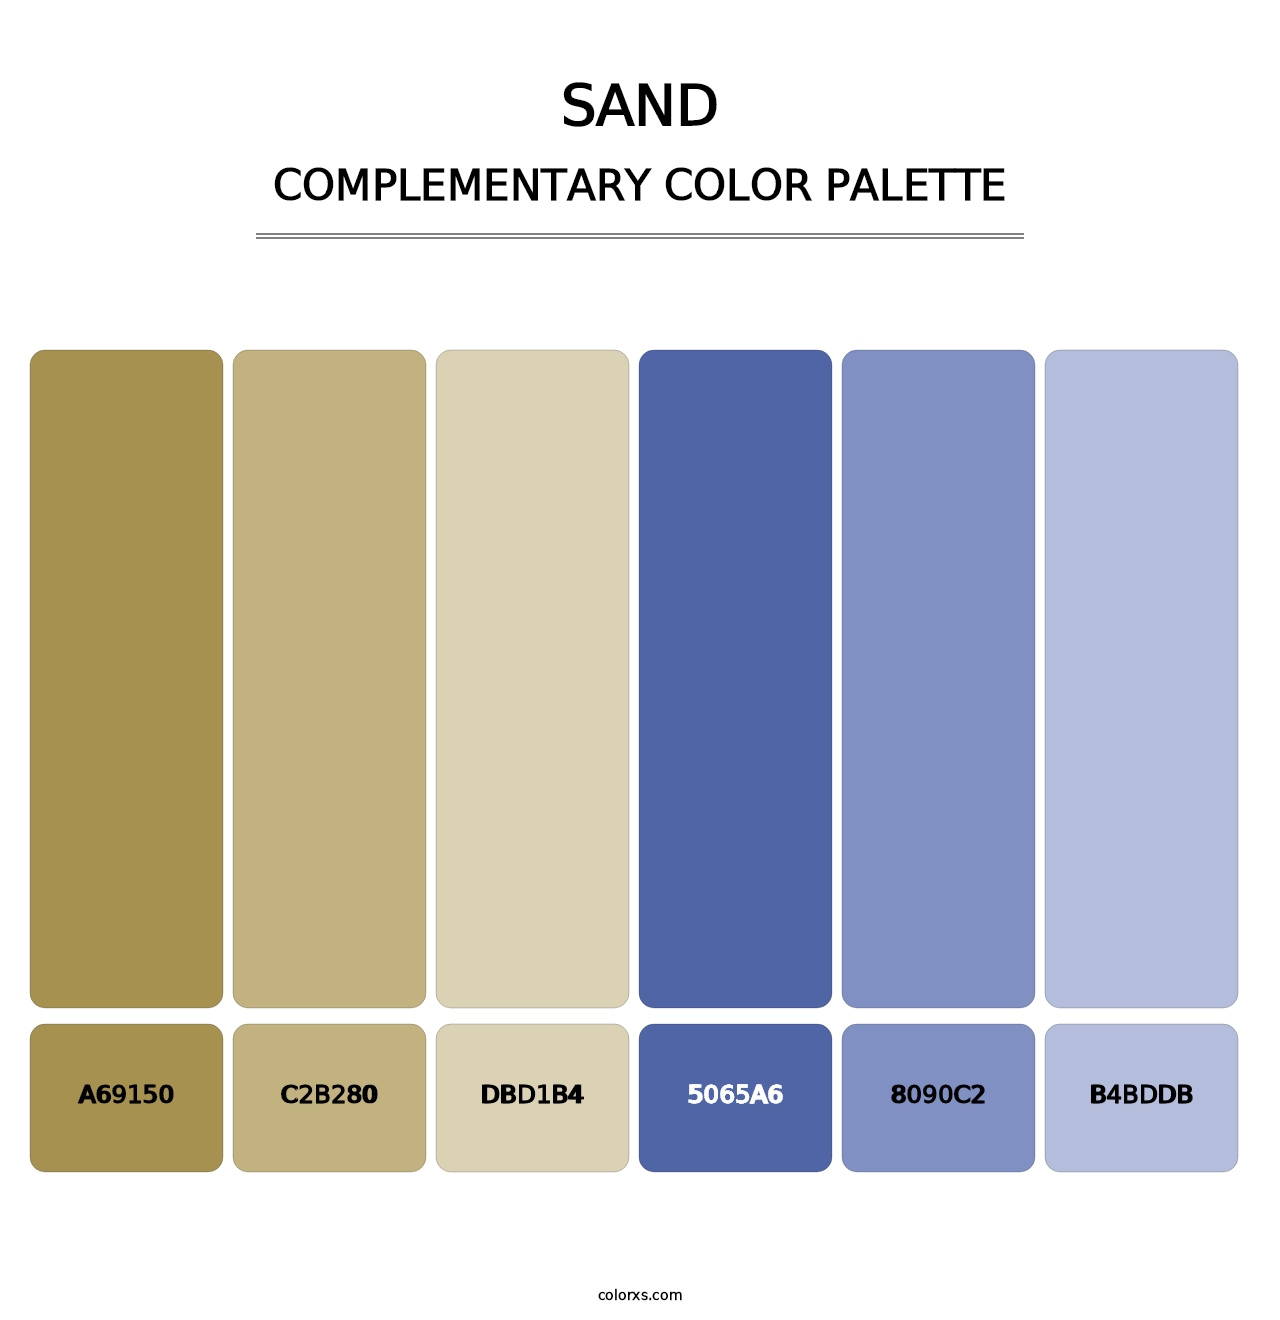 Sand - Complementary Color Palette